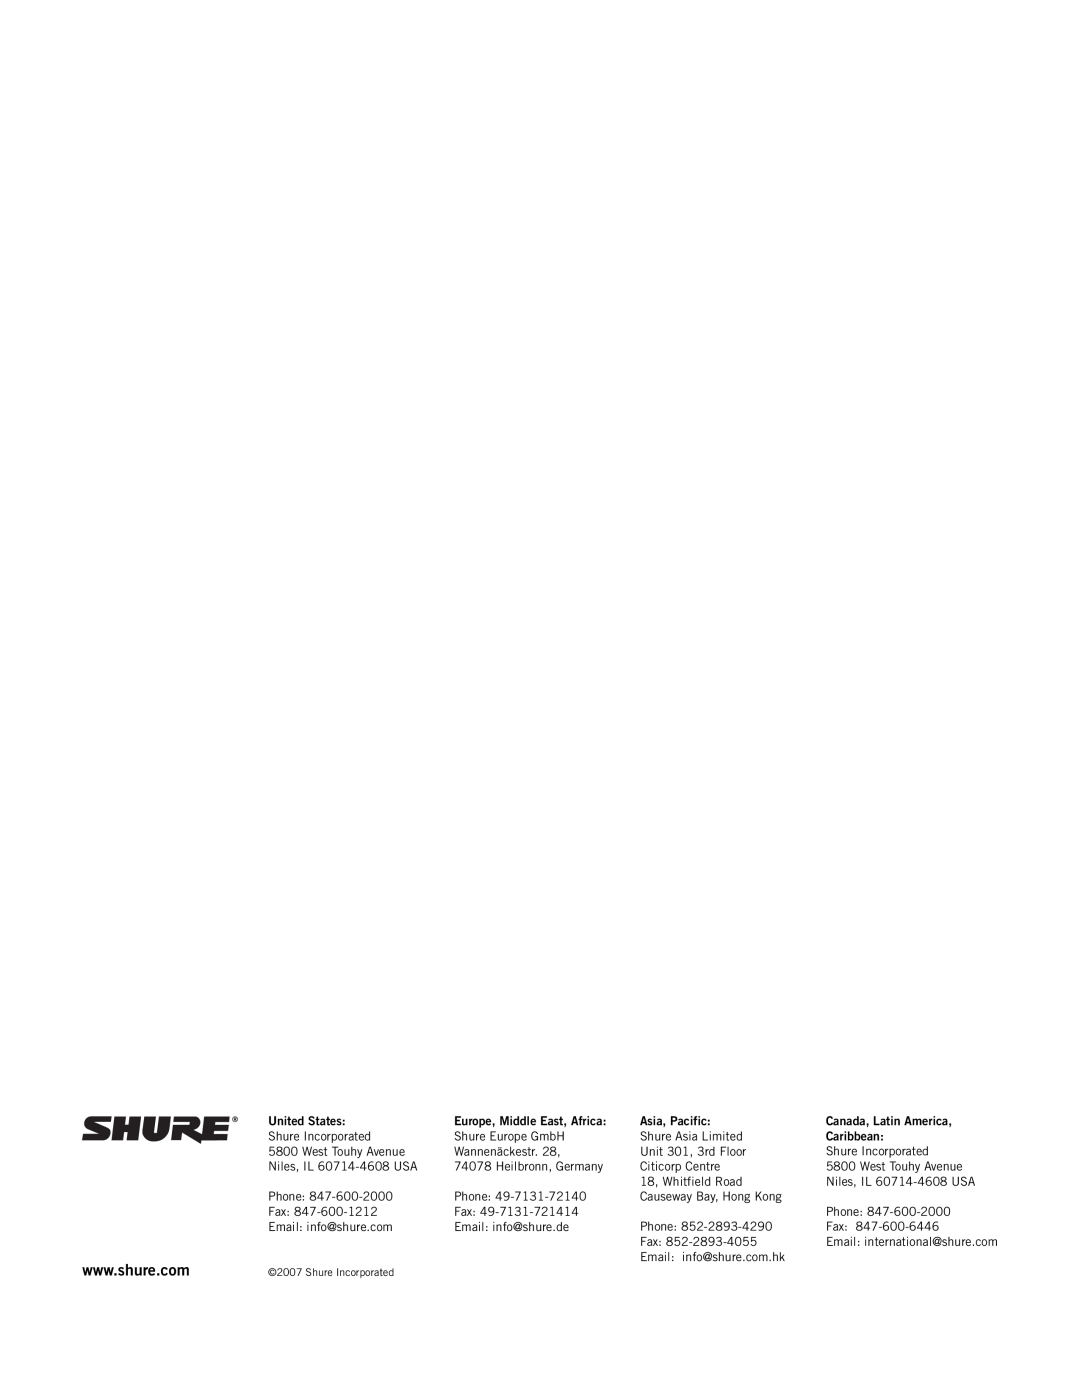 Shure DFR11EQ VERSION 5 manual United States, Europe, Middle East, Africa, Asia, Pacific, Canada, Latin America, Caribbean 